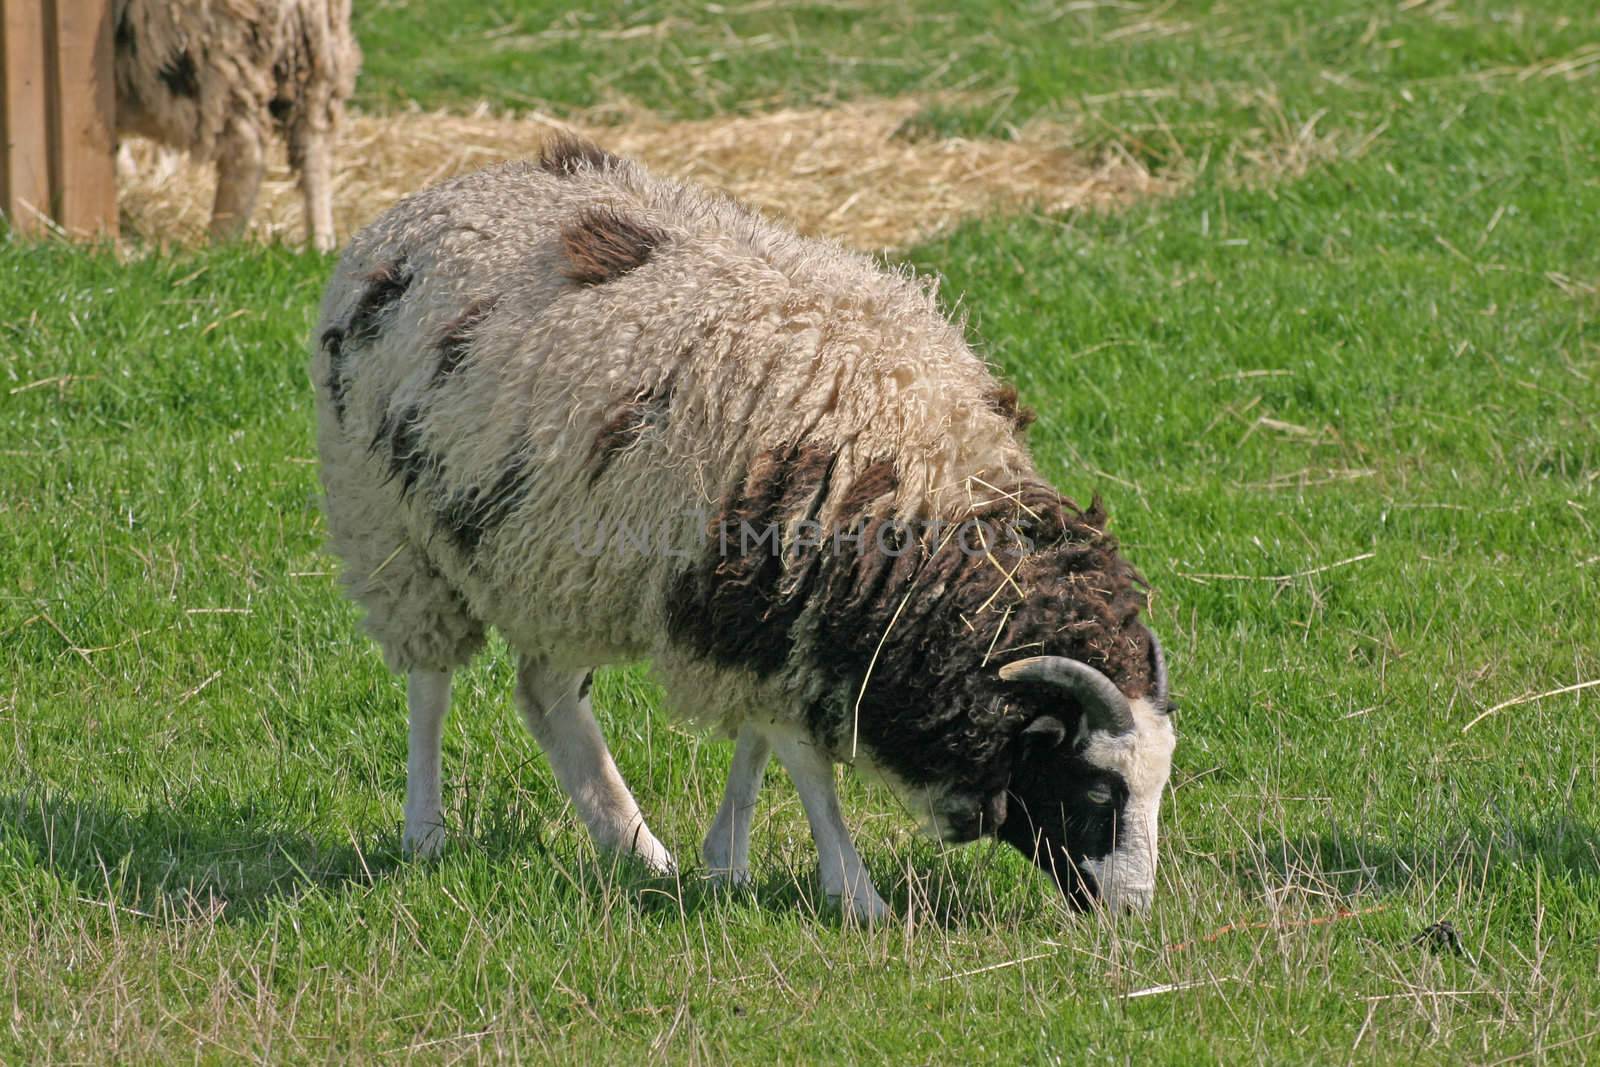 Brown and White Sheep on a Cheshire Farm